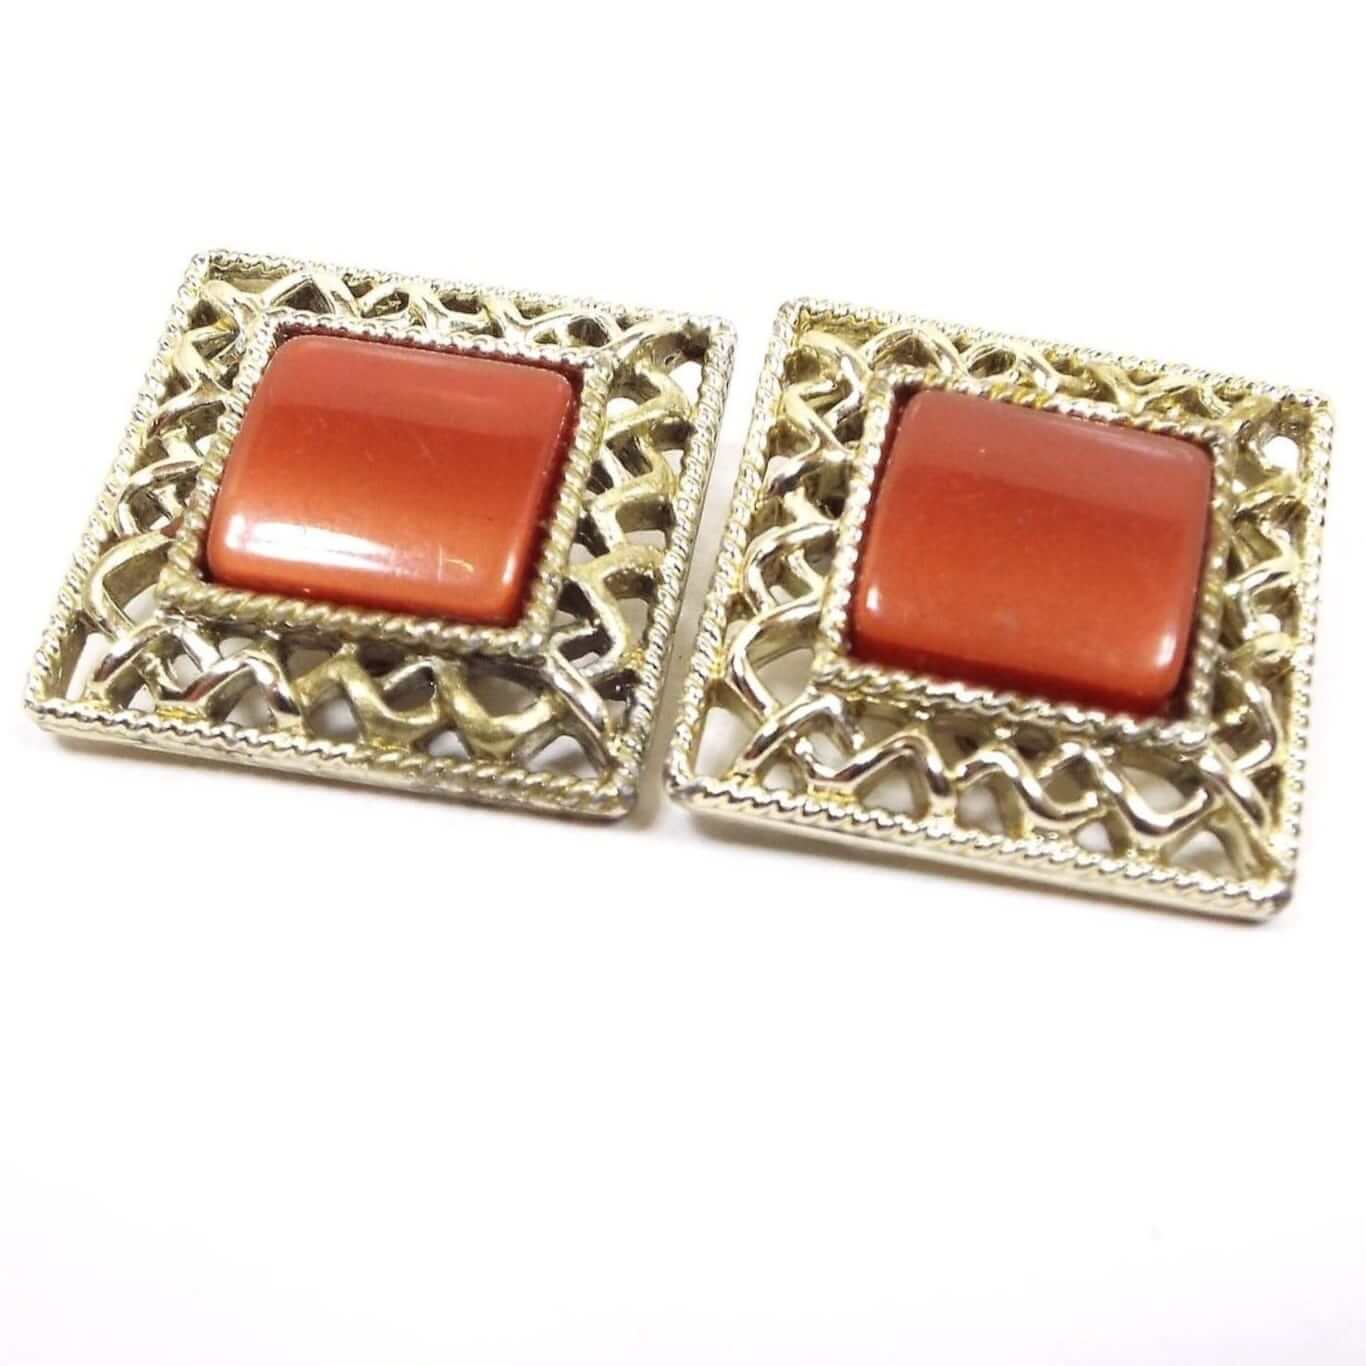 Front view of the Mid Century vintage Coro clip on earrings. They are square in shape with puffy middle lucite plastic cabs. The cabs are a pearly burnt orange in color and are surrounded by a gold tone color woven style filigree edge. 